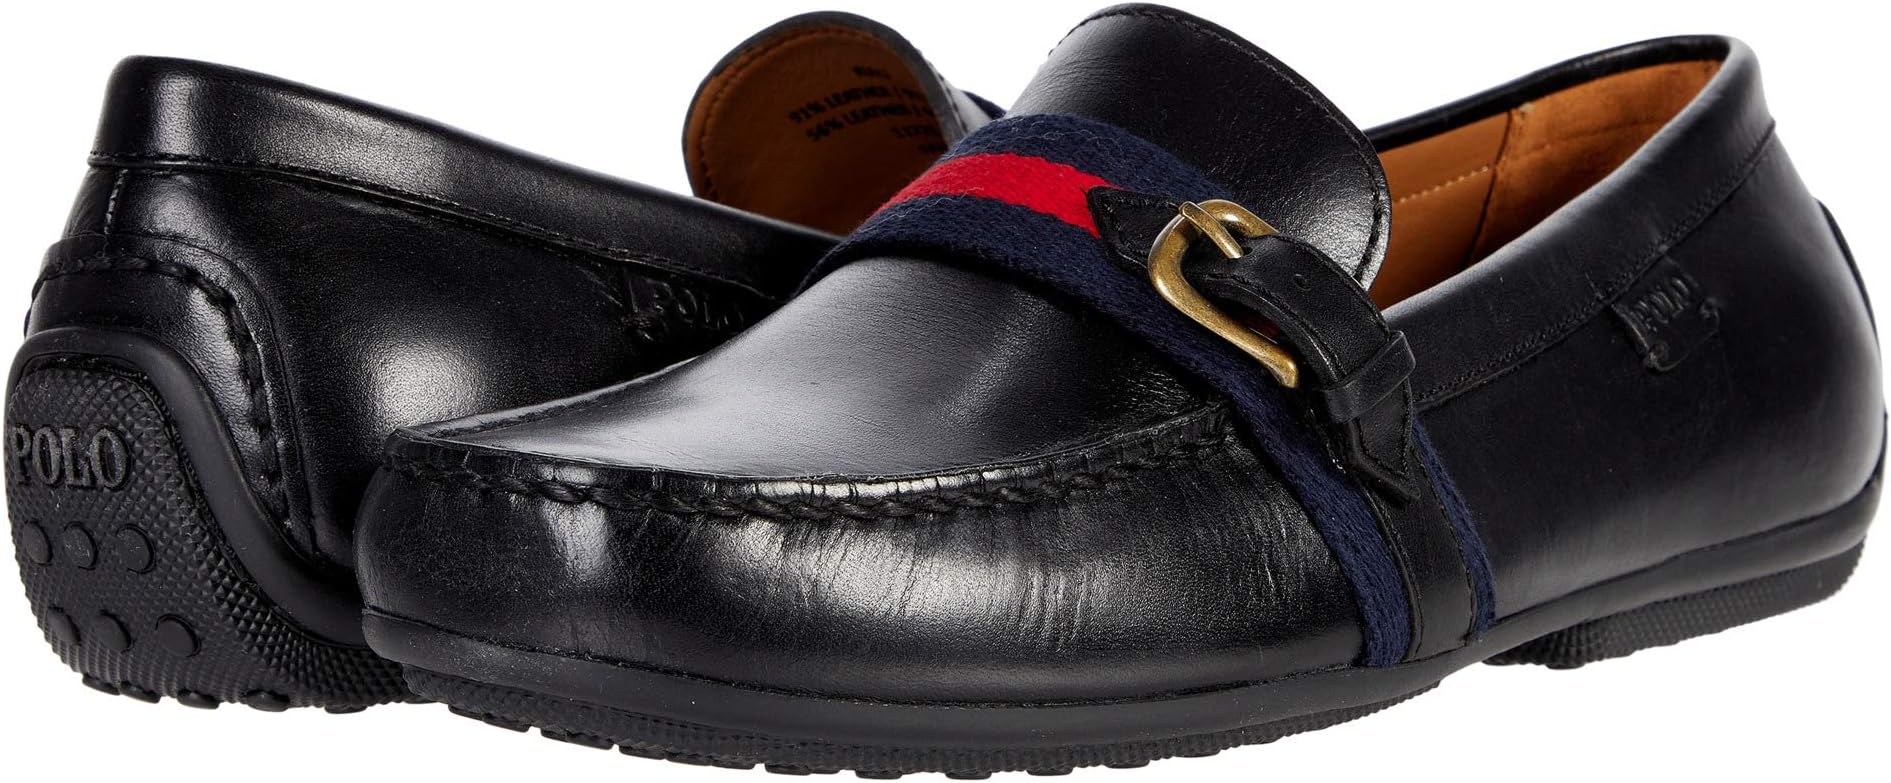 Лоферы Riali Loafer Polo Ralph Lauren, цвет Black Heavyweight Smooth Leather heavyweight coated paper c6030c